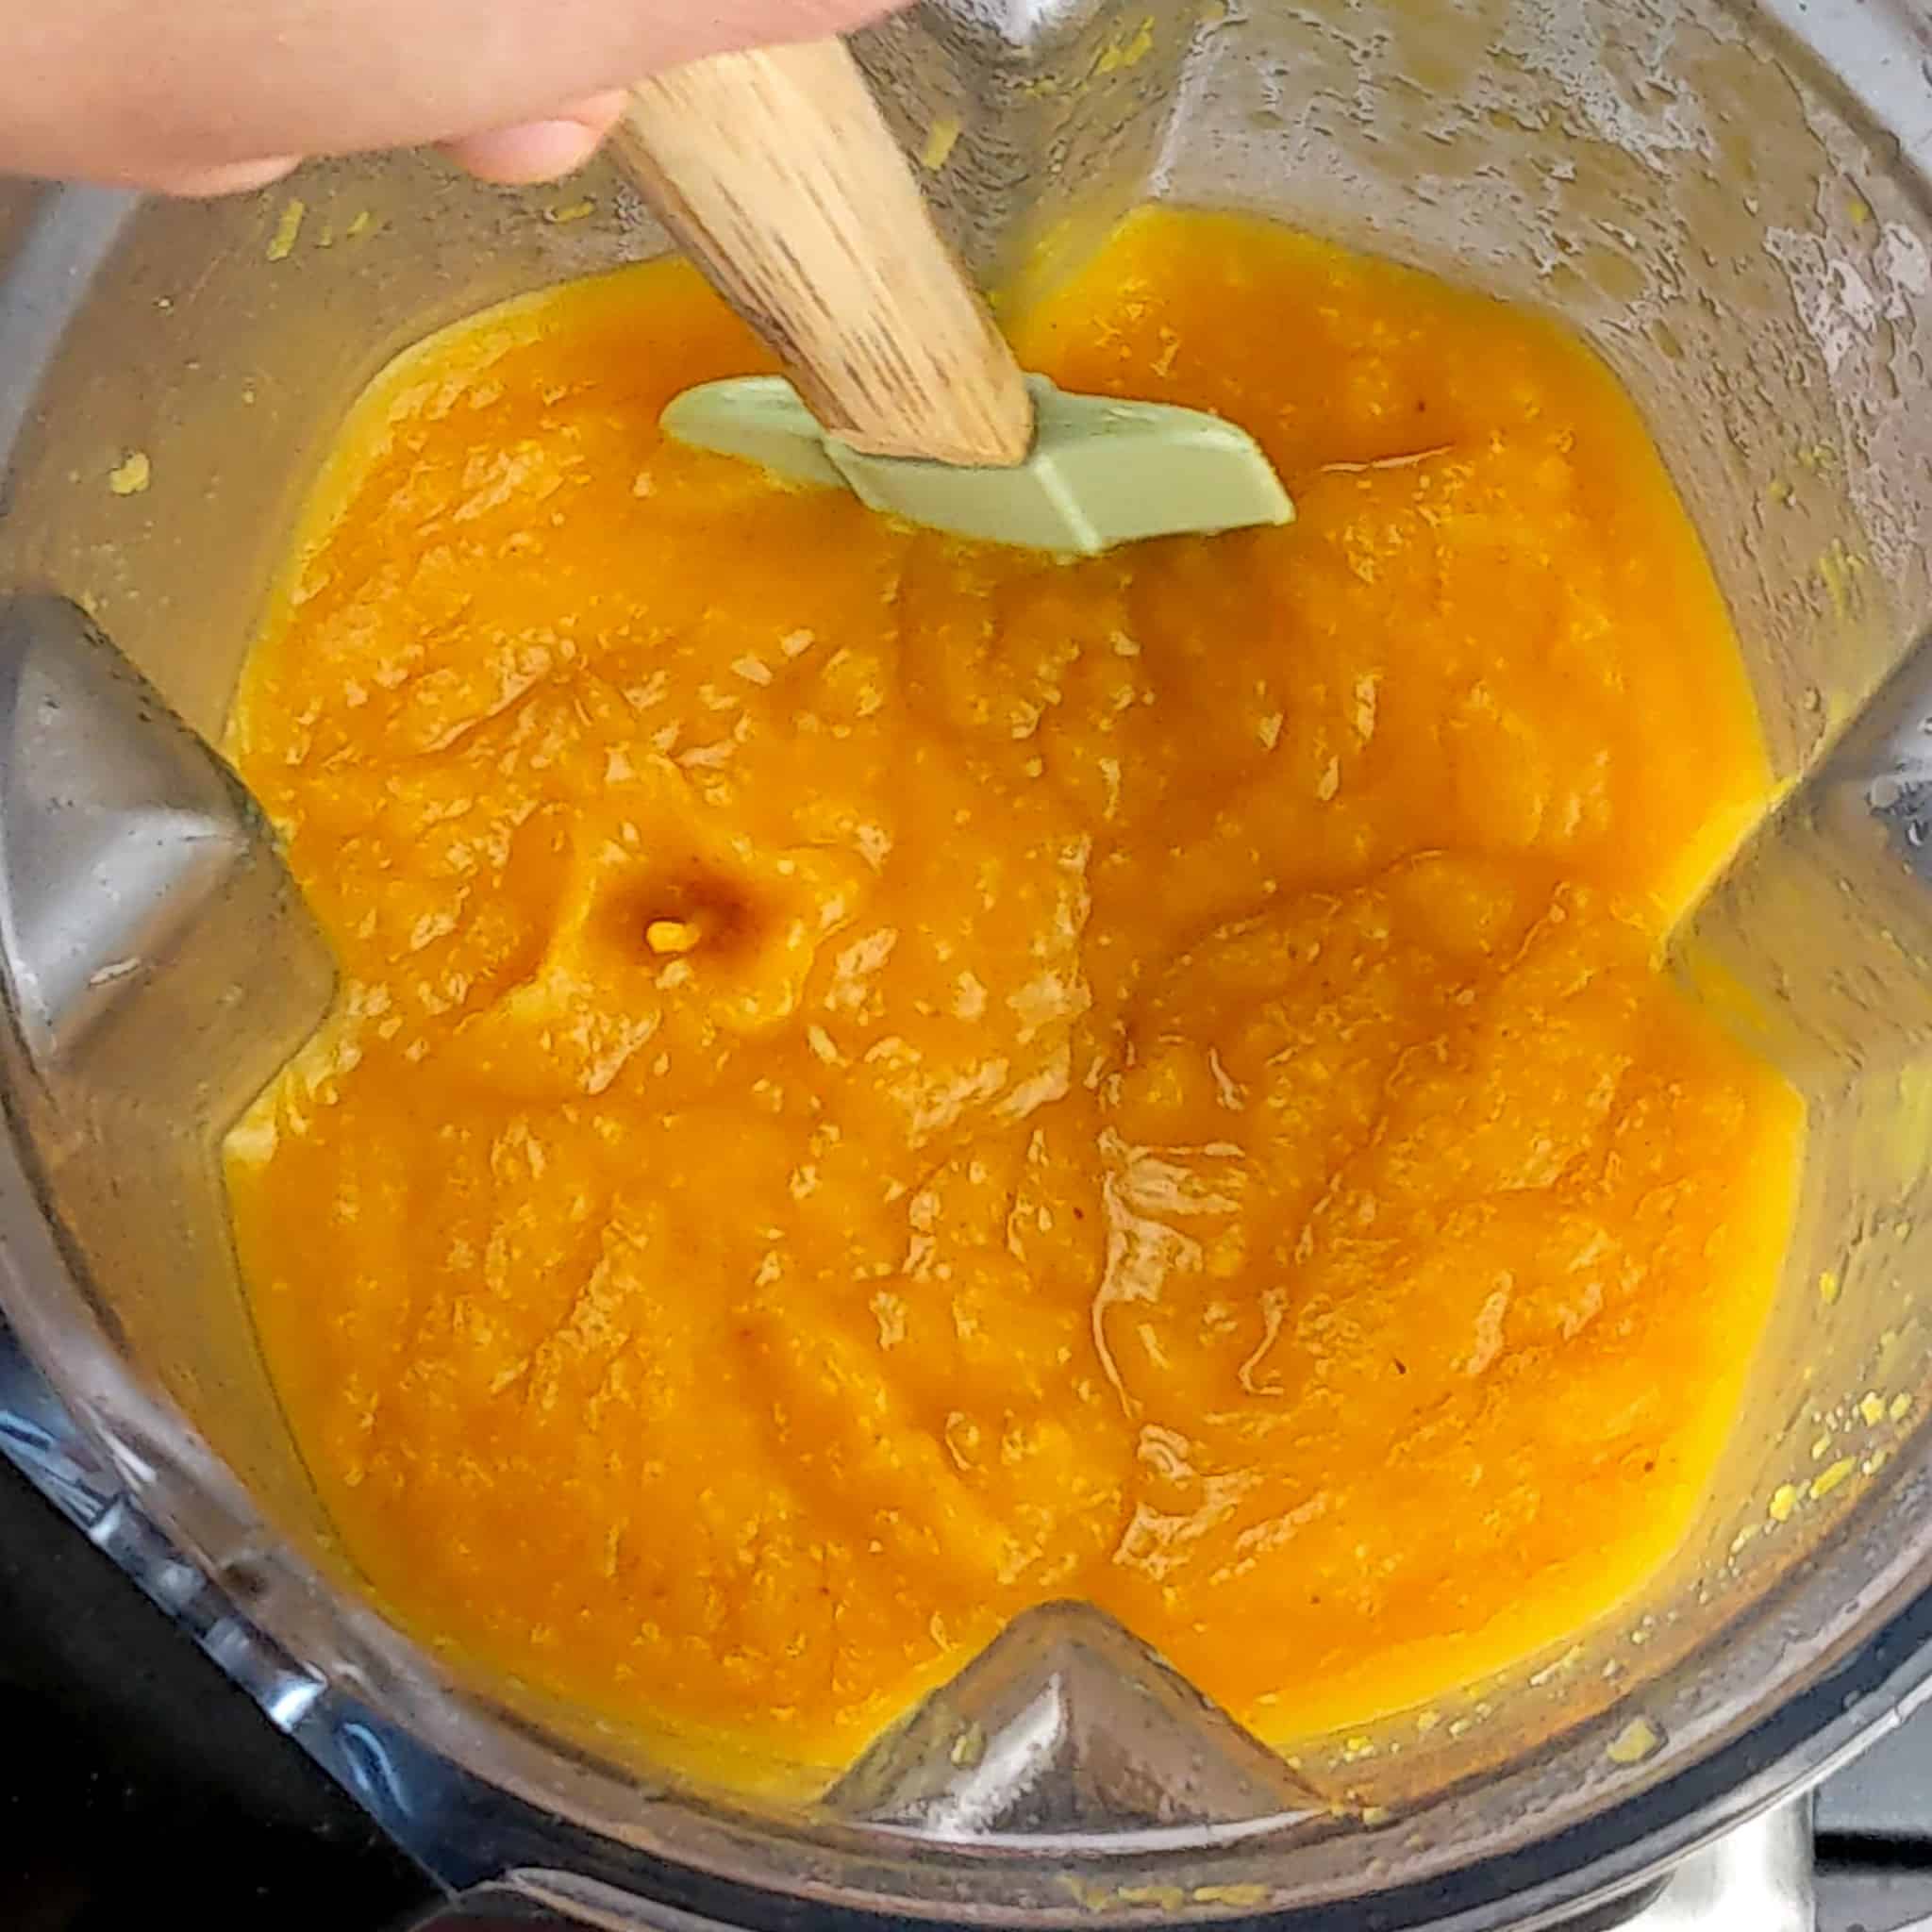 pureed roasted butternut squash in a blender container being scrapped and mixed with a silicone spatula with a wooden handle